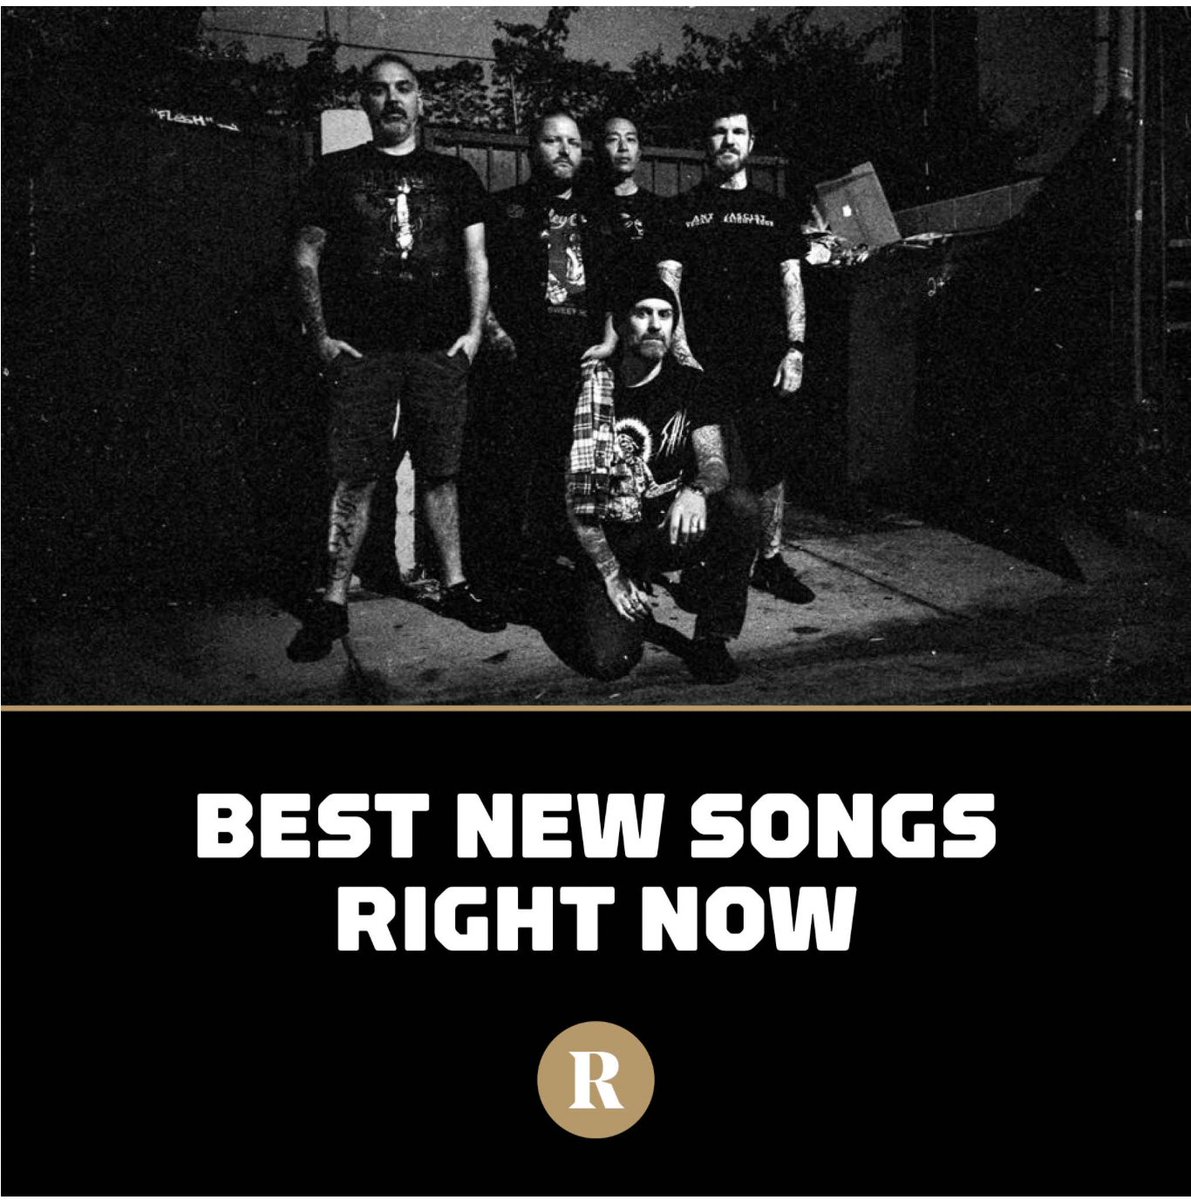 New SECT via @Revolvermag Best New Songs Right Now revolvermag.com/music/6-best-n…